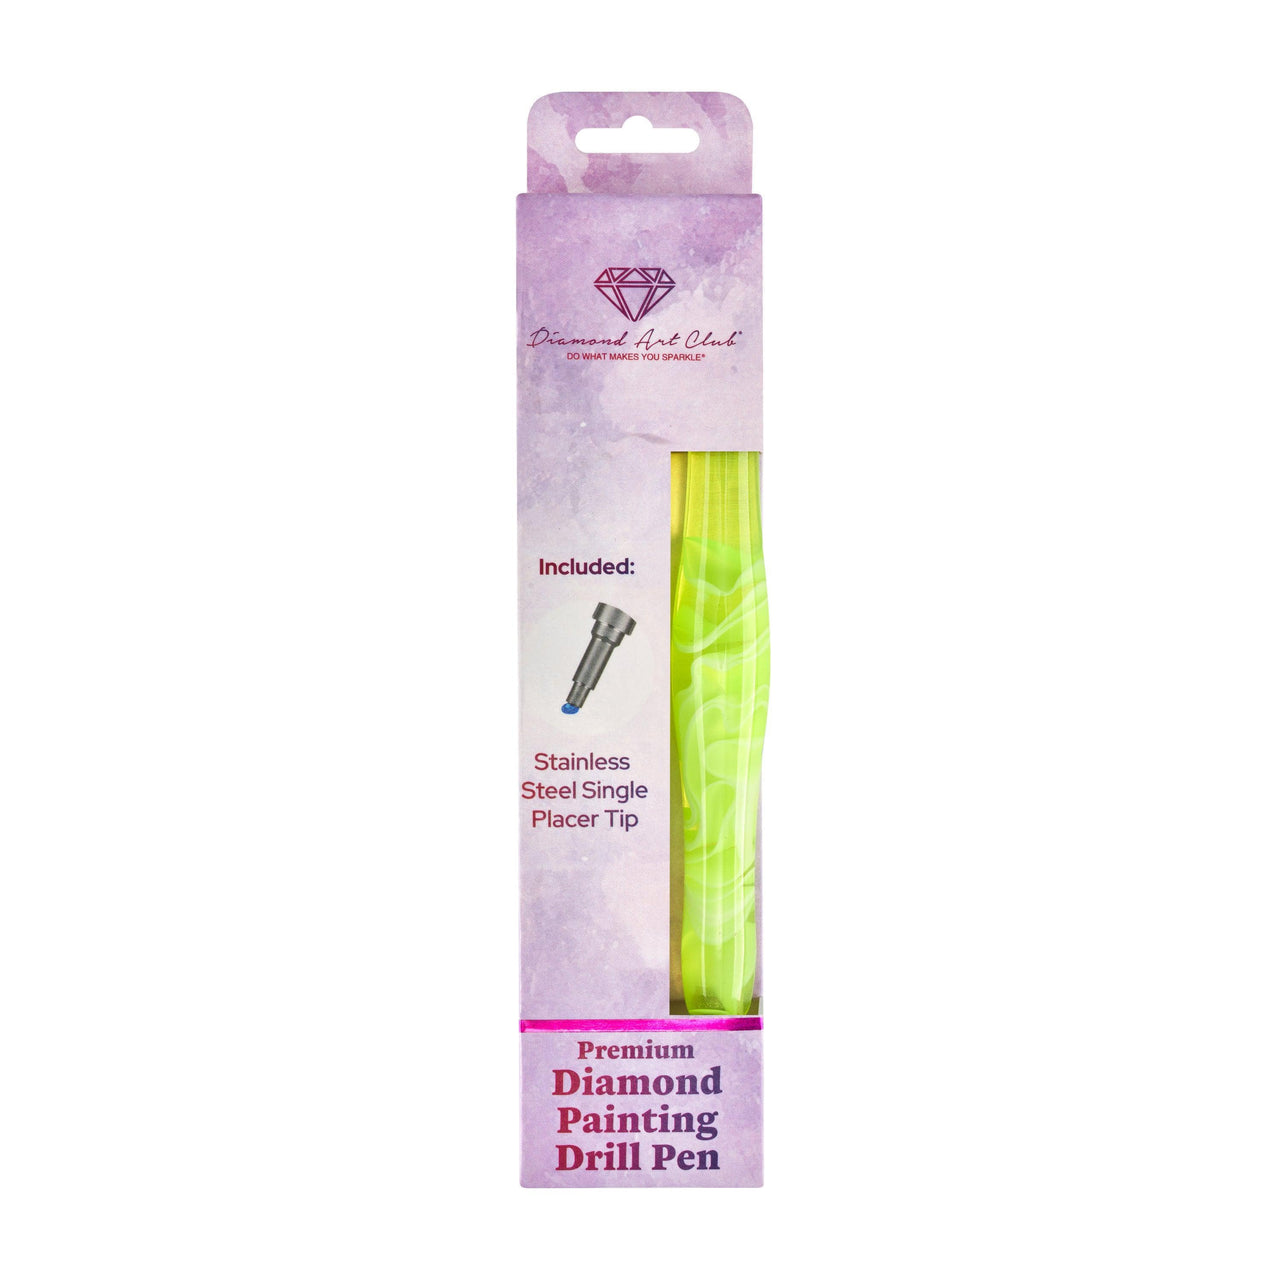 Diamond Painting Mint Julep Premium Drill Pen with Stainless Steel Tip